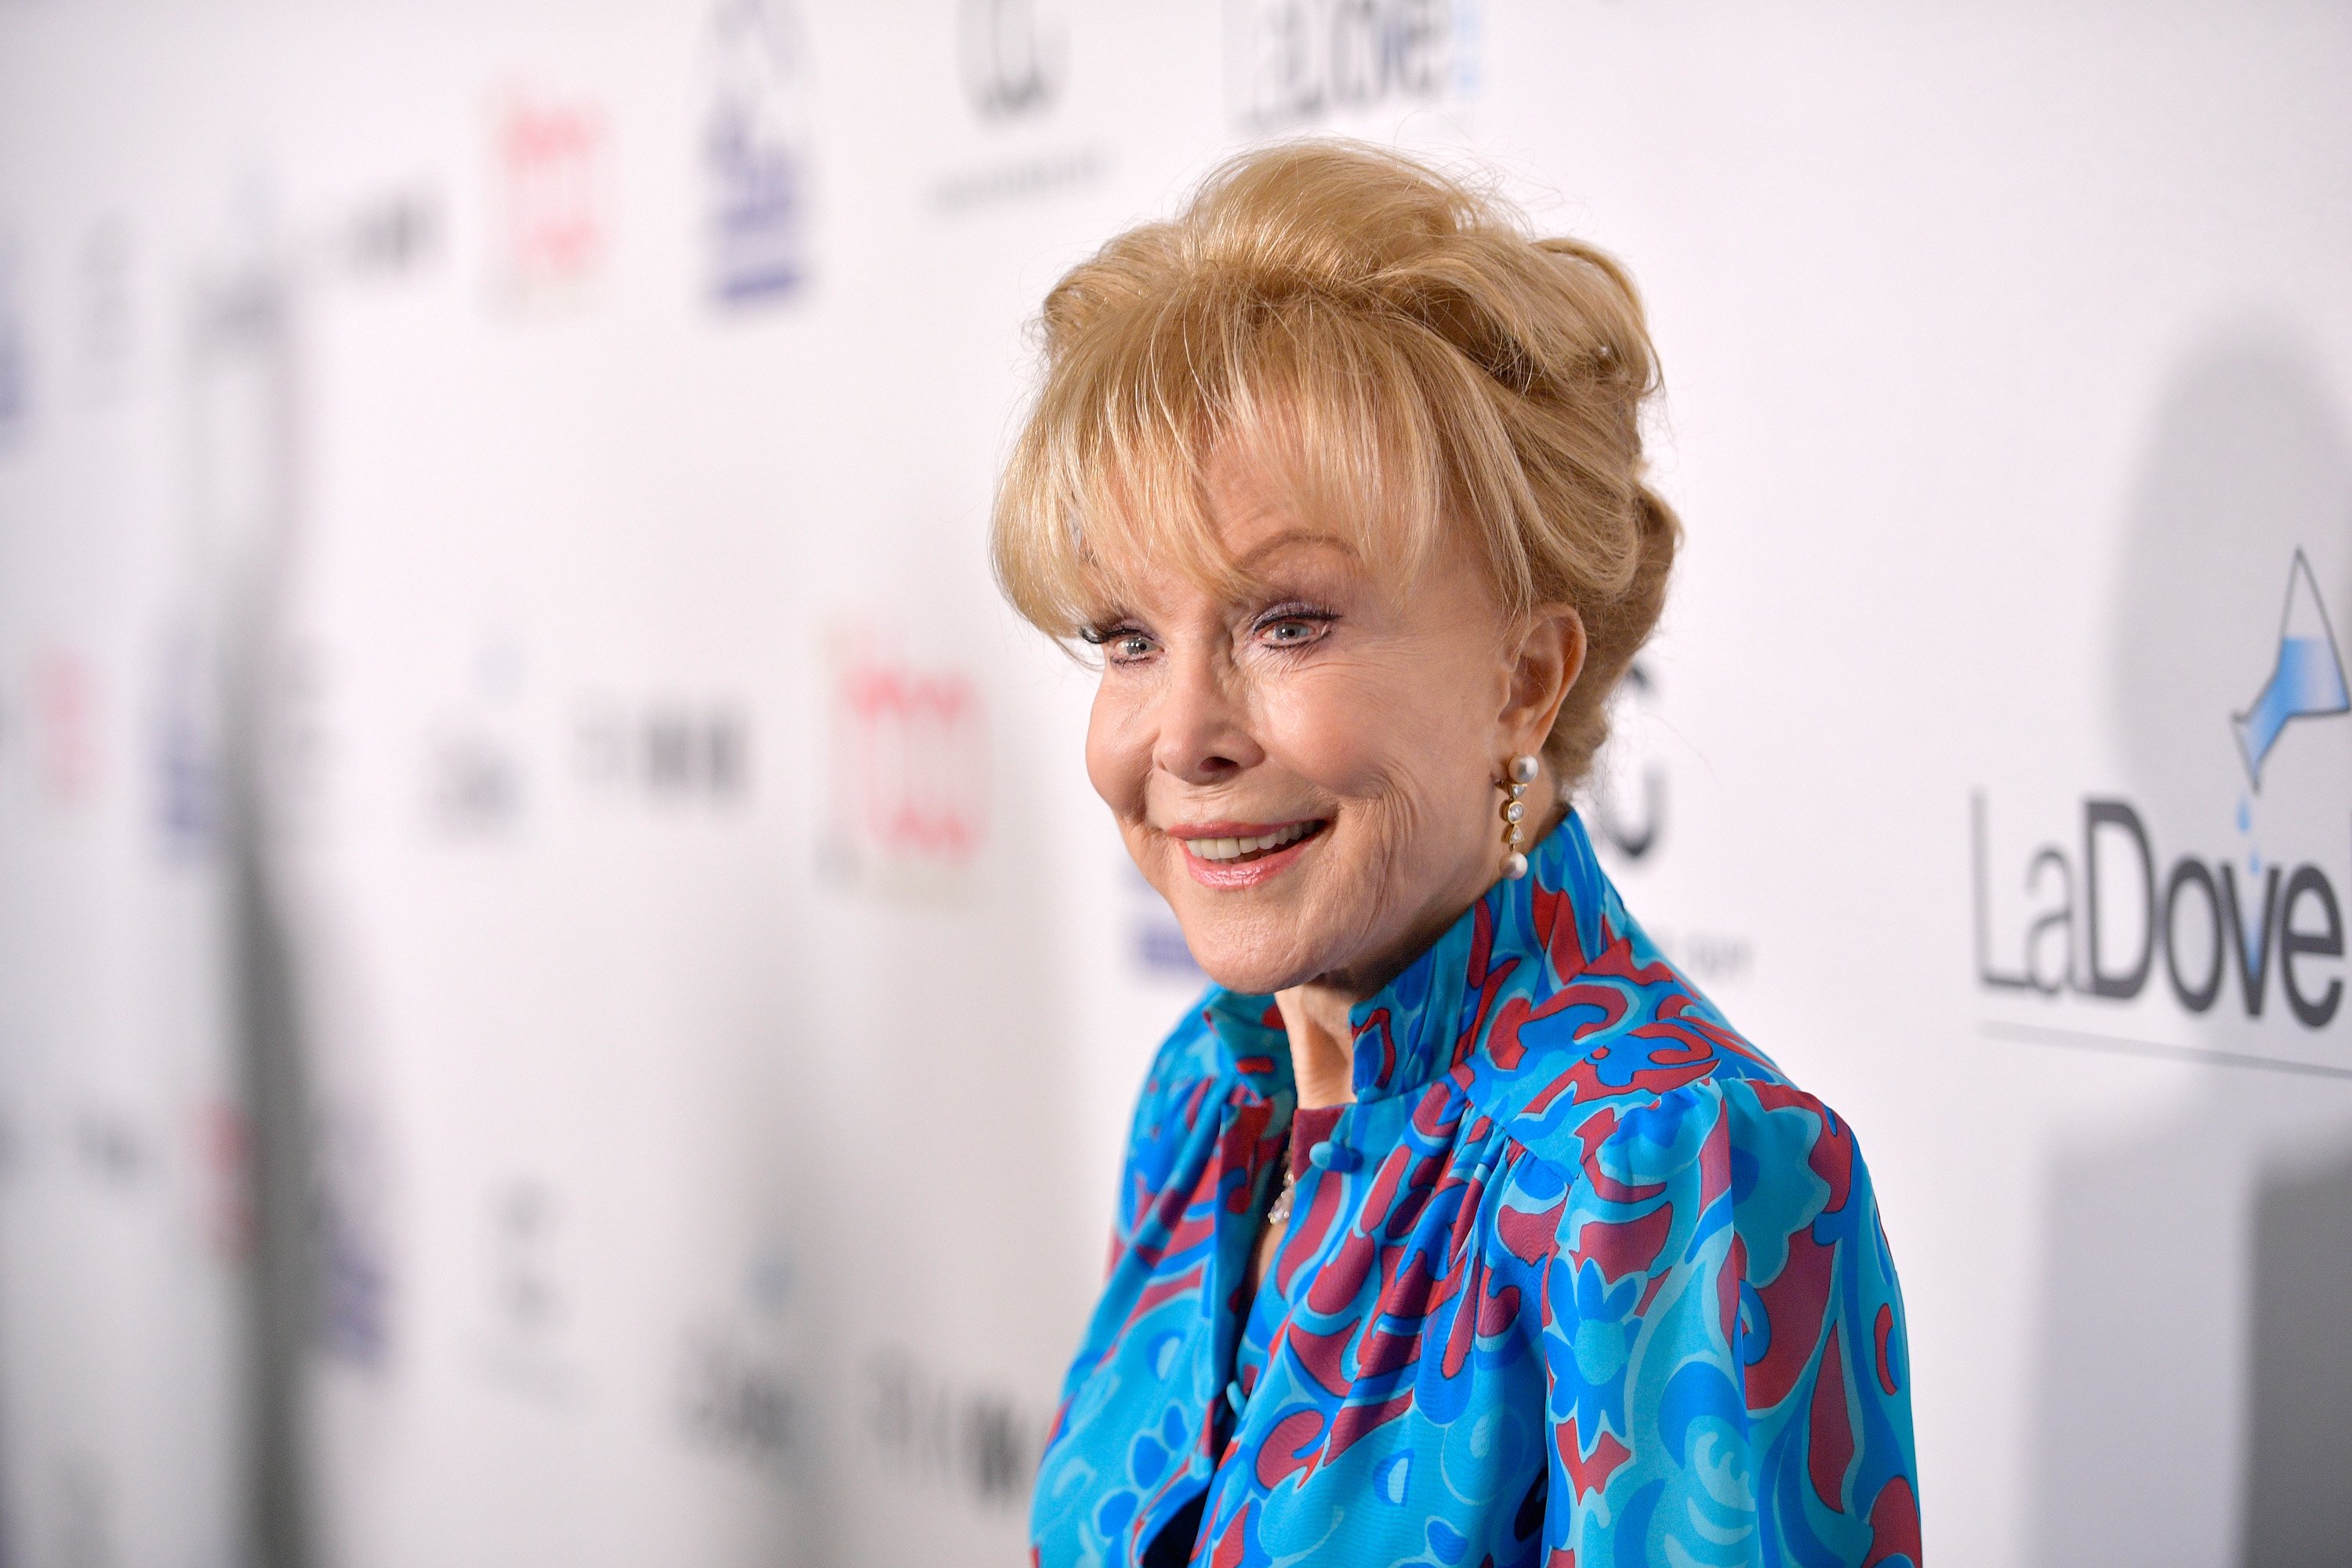 Barbara Eden attends the 4th Hollywood Beauty Awards in Los, Angeles, California on February 25, 2018 | Photo: Getty Images